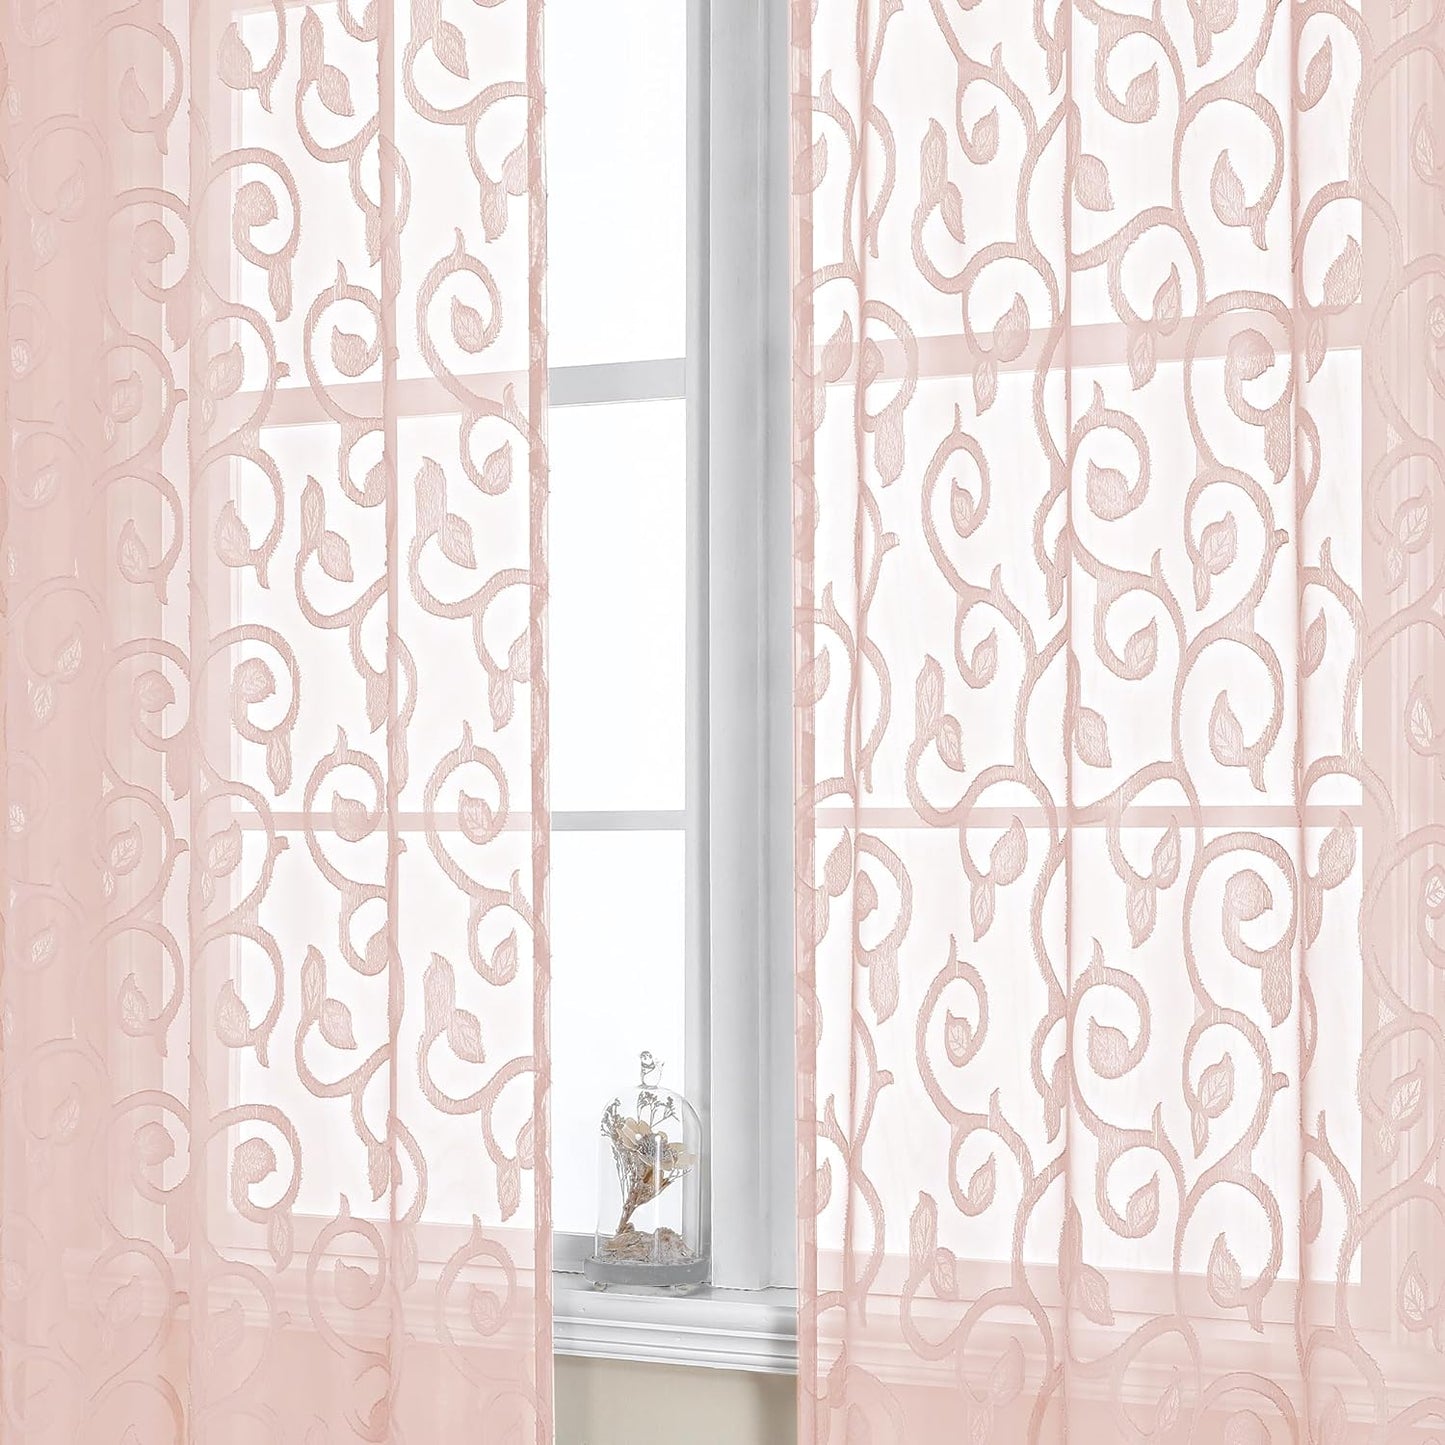 OWENIE Furman Sheer Curtains 84 Inches Long for Bedroom Living Room 2 Panels Set, Light Filtering Window Curtains, Semi Transparent Voile Top Dual Rod Pocket, Grey, 40Wx84L Inch, Total 84 Inches Width  OWENIE Blush 40W X 63L 